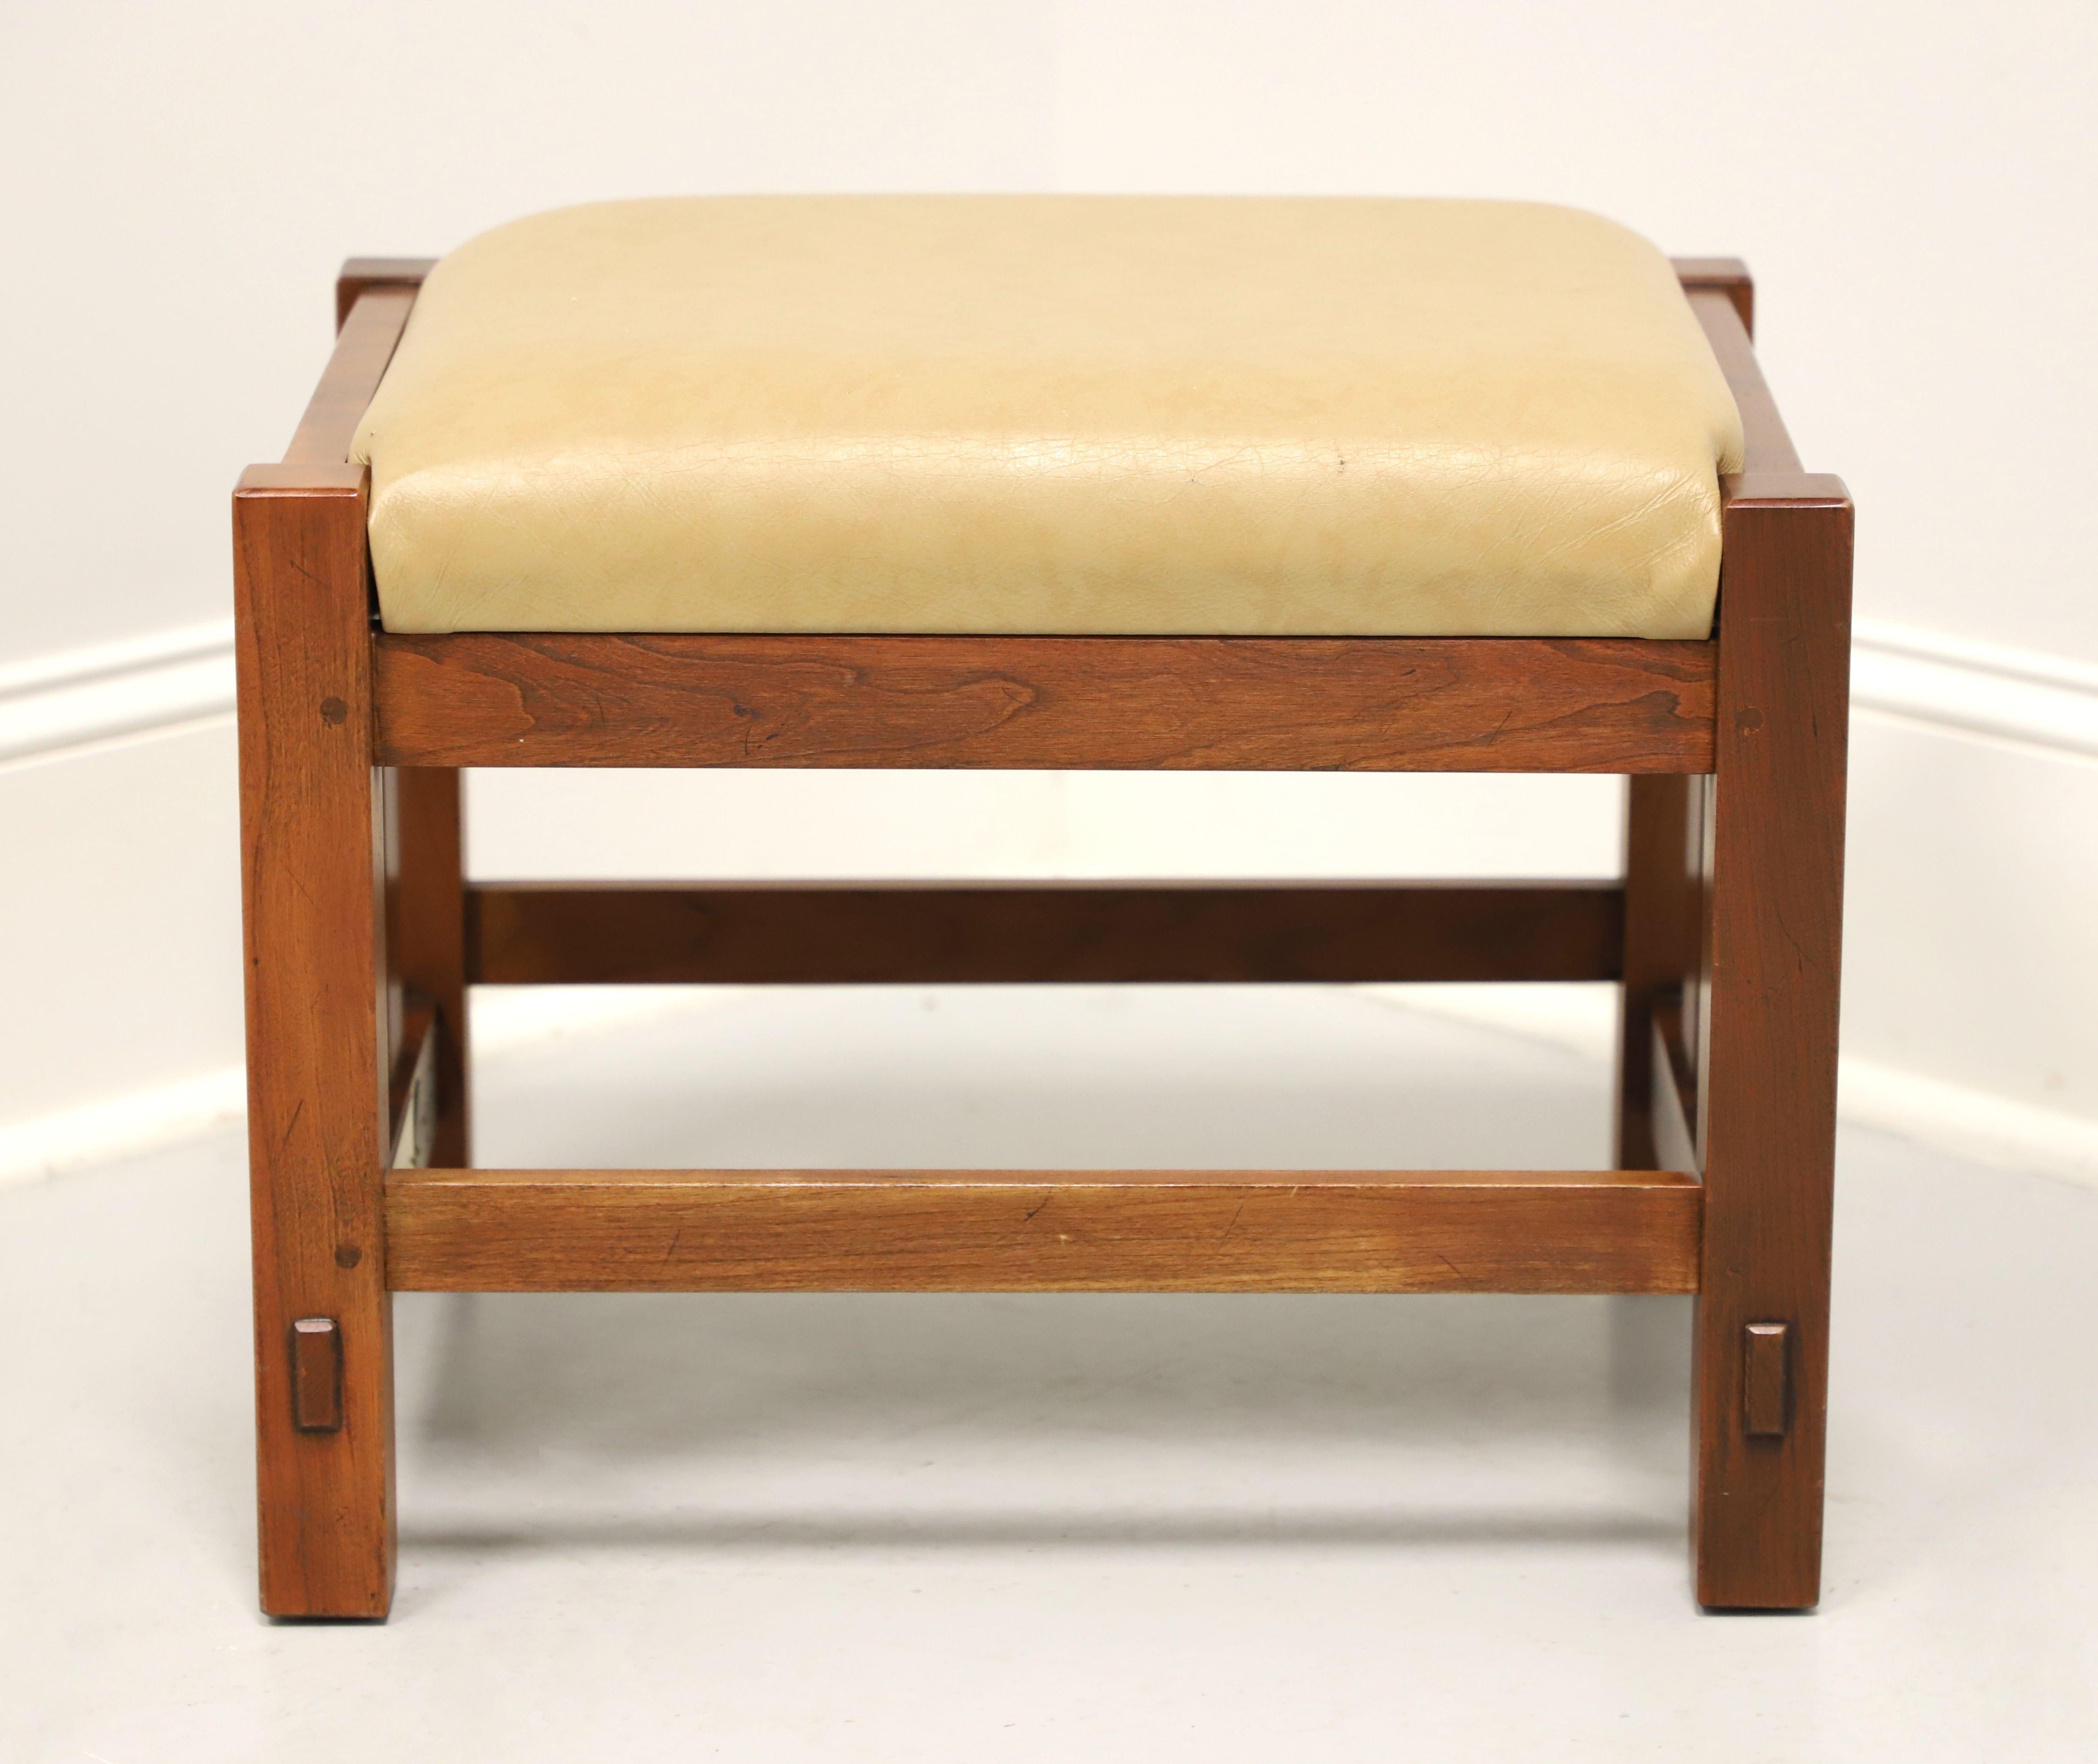 American STICKLEY Mission Cherry & Leather Footstool 91-495 - B